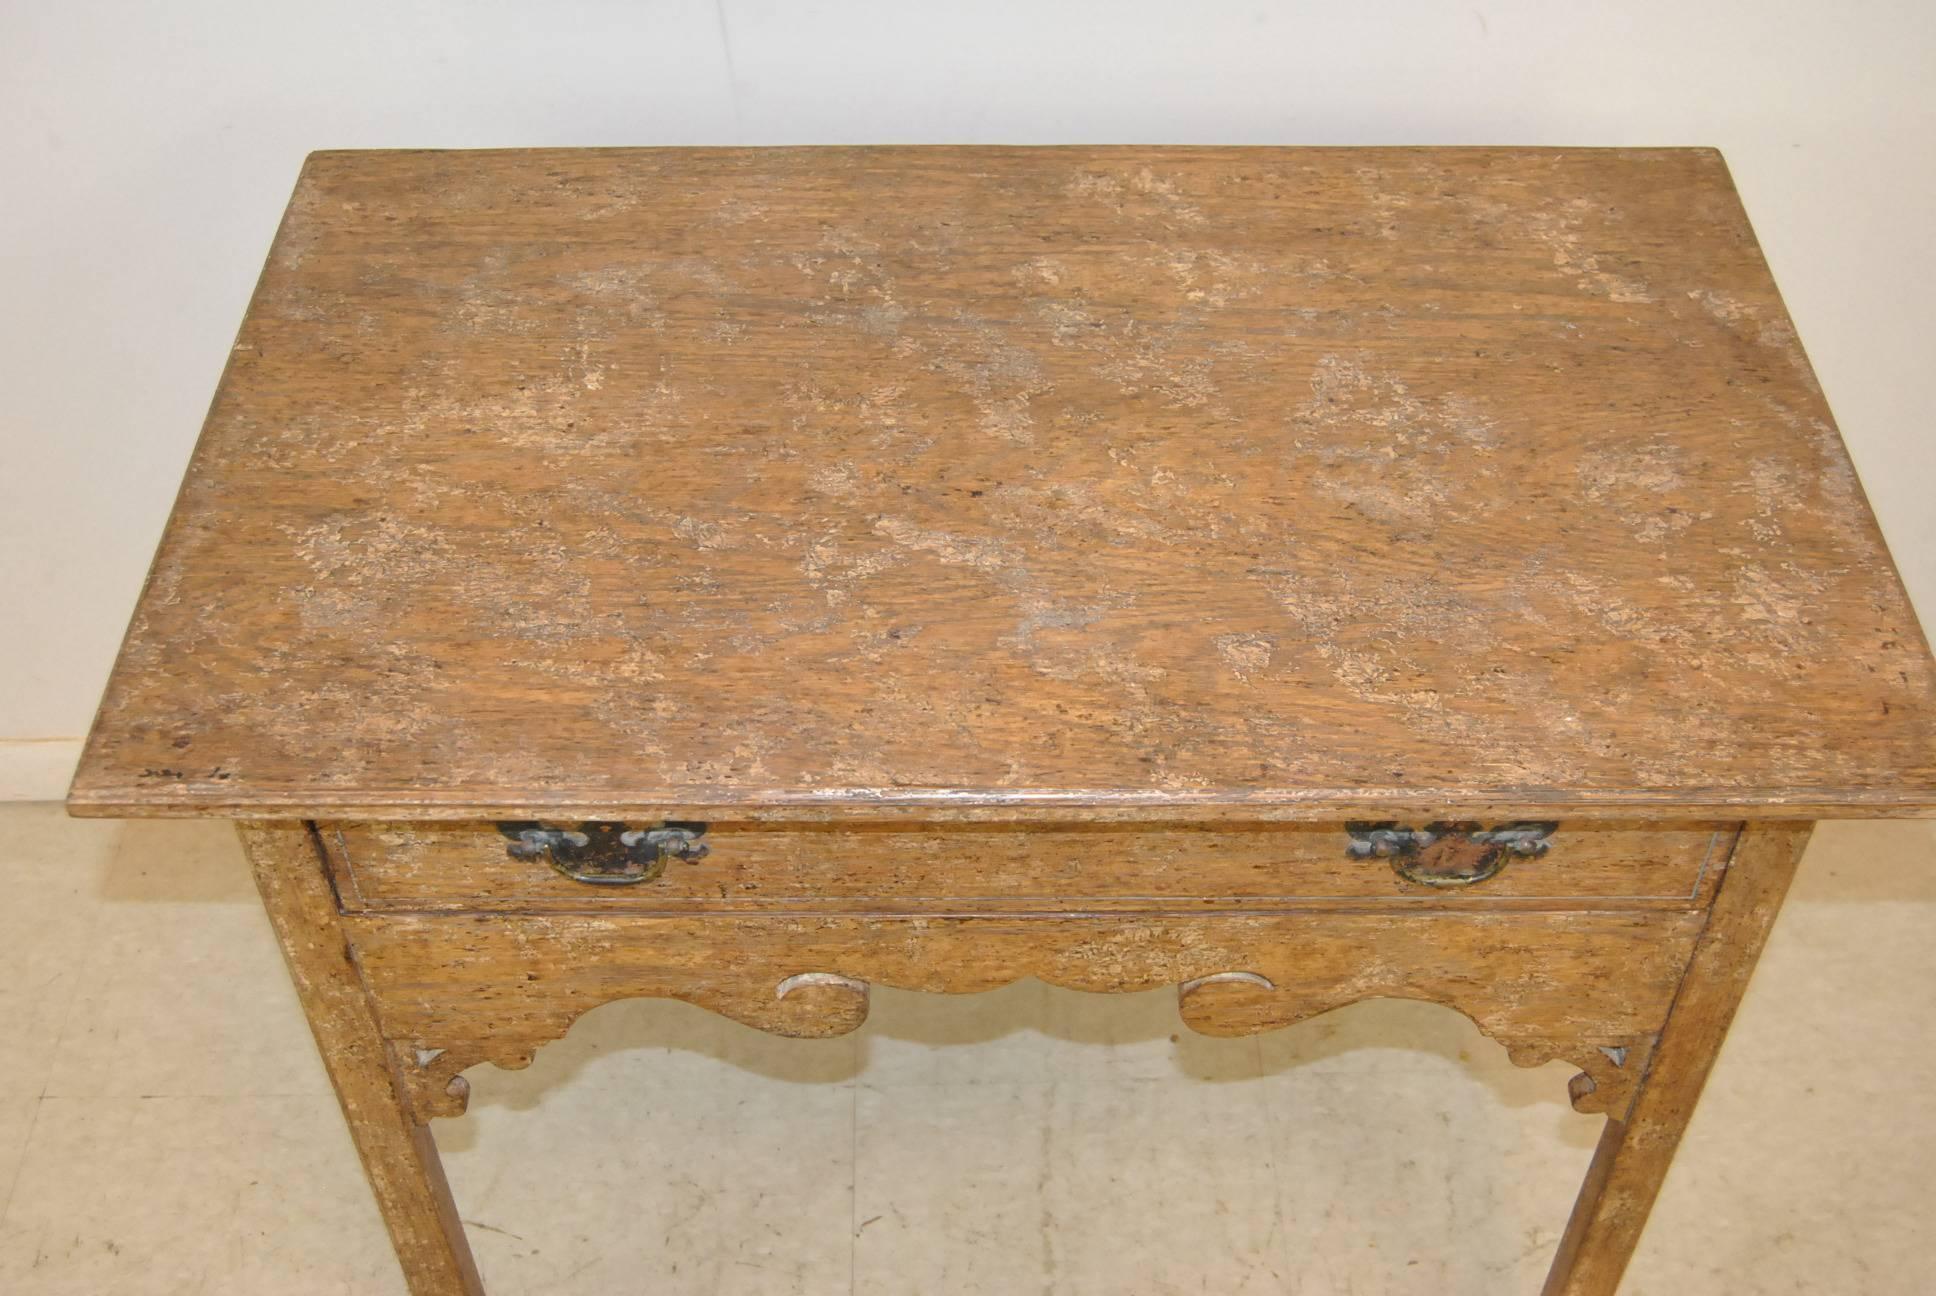 A beautiful French Country single drawer stand by Isenhour. This stand features a heavy distressed old paint finish on oak, brass hardware and a nice cut out skirt. Excellent condition. The dimensions are 31.5